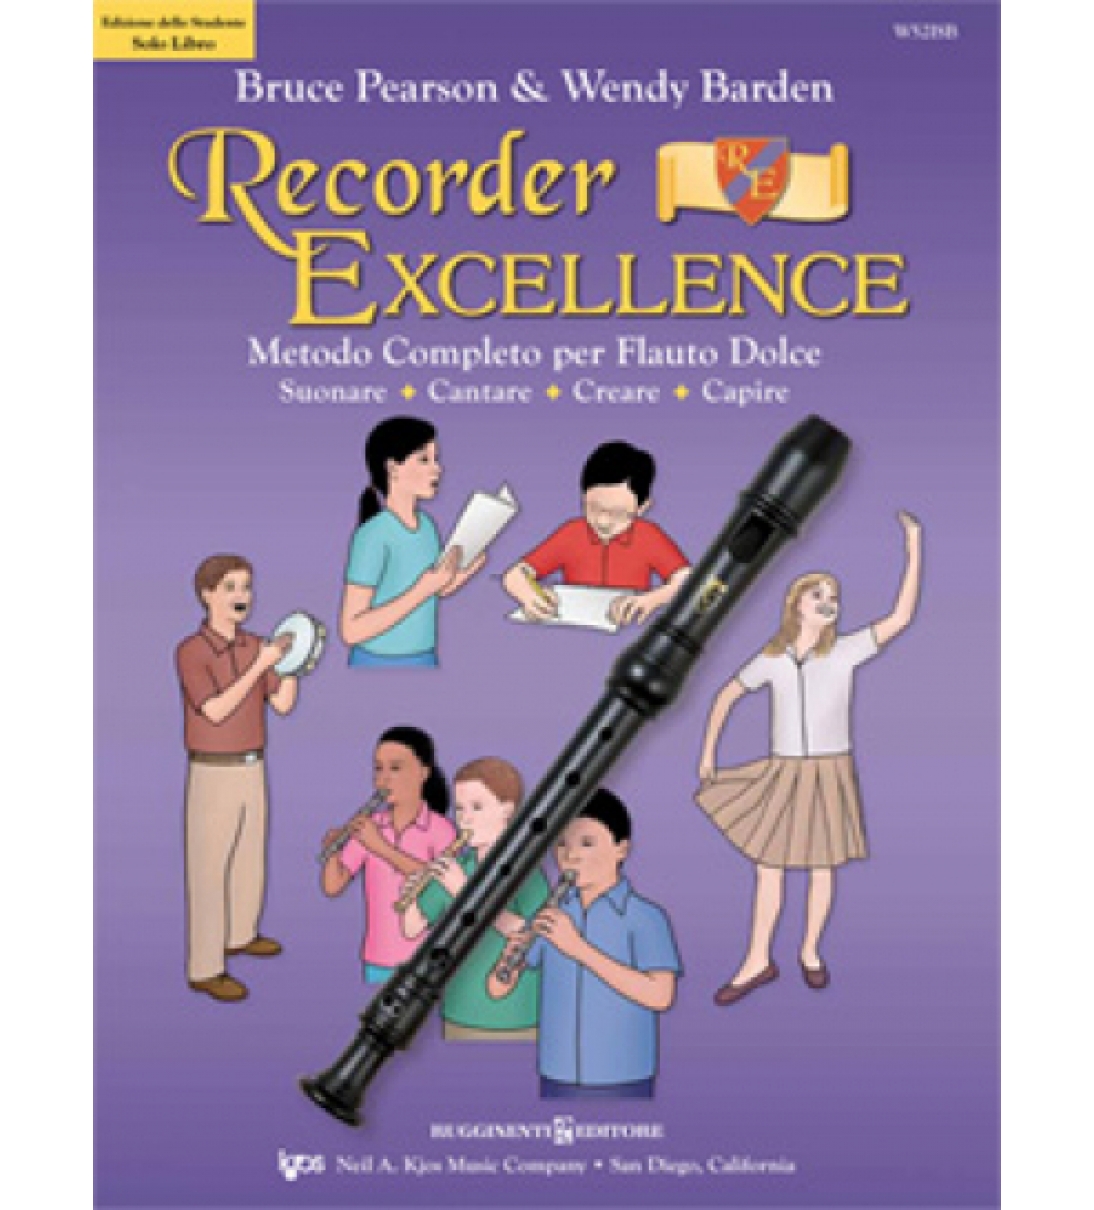 RECORDER EXCELLENCE - Metodo completo per Flauto Dolce